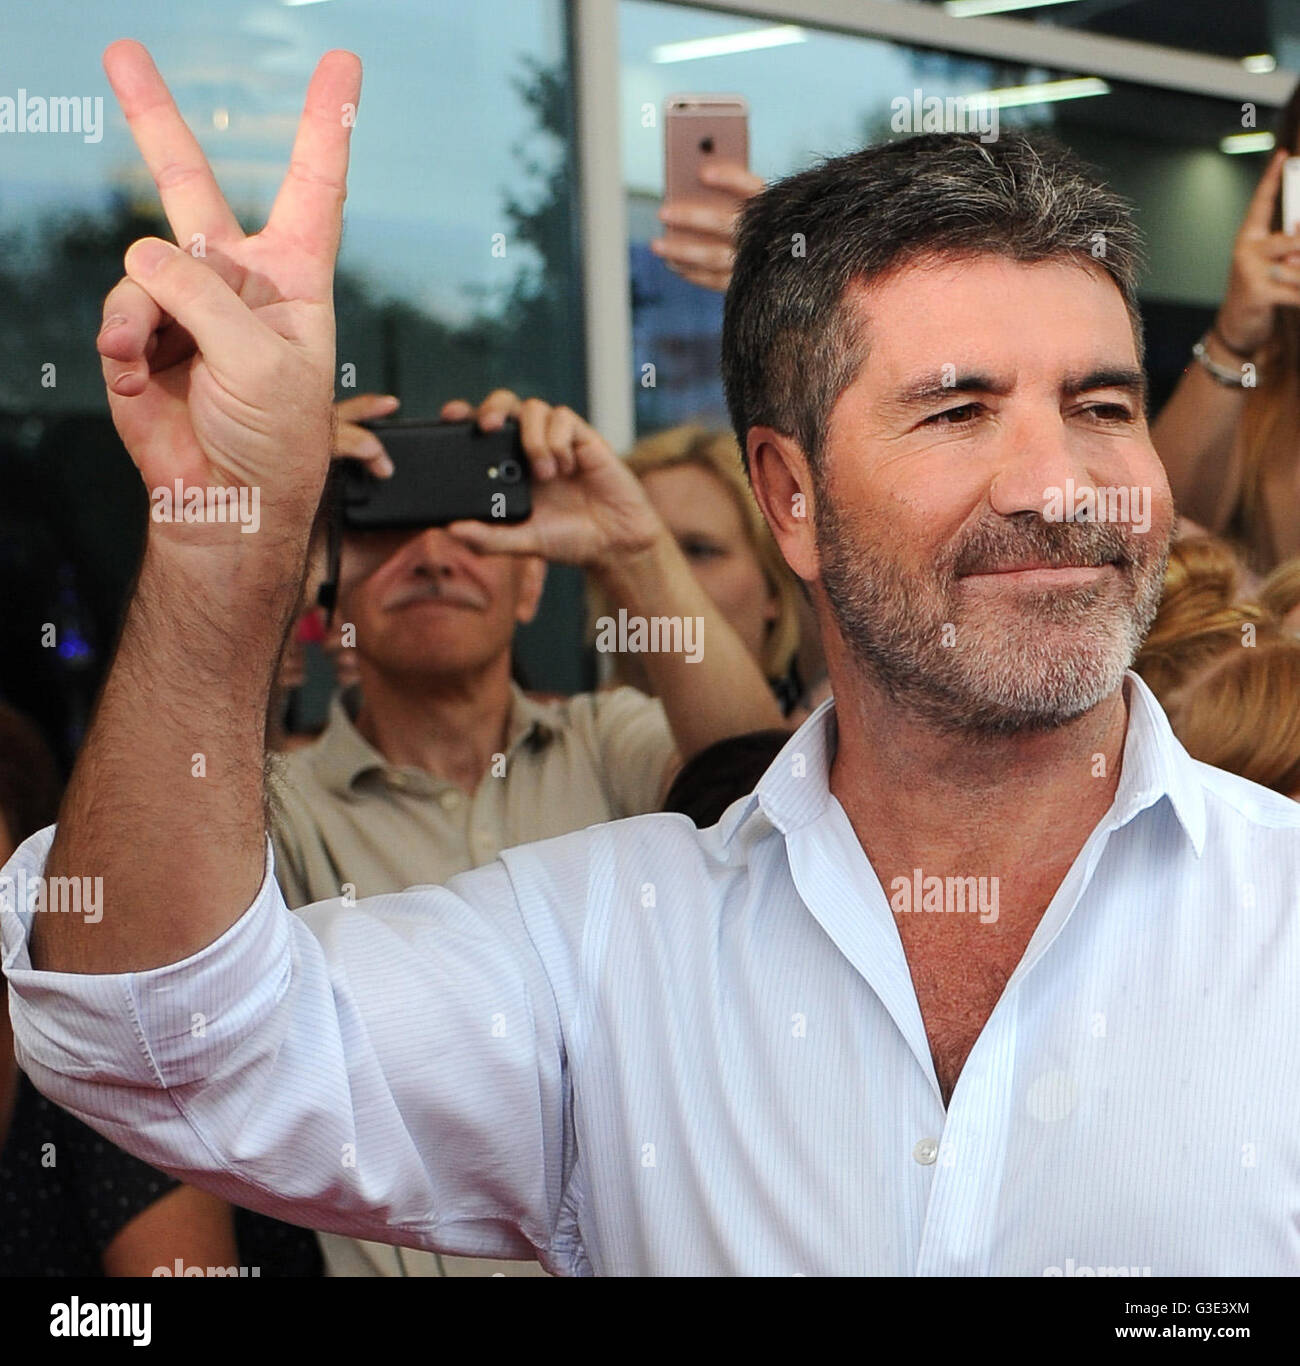 X Factor Judge Simon Cowell Arrives At The King Power Stadium In Leicester As The Auditions For